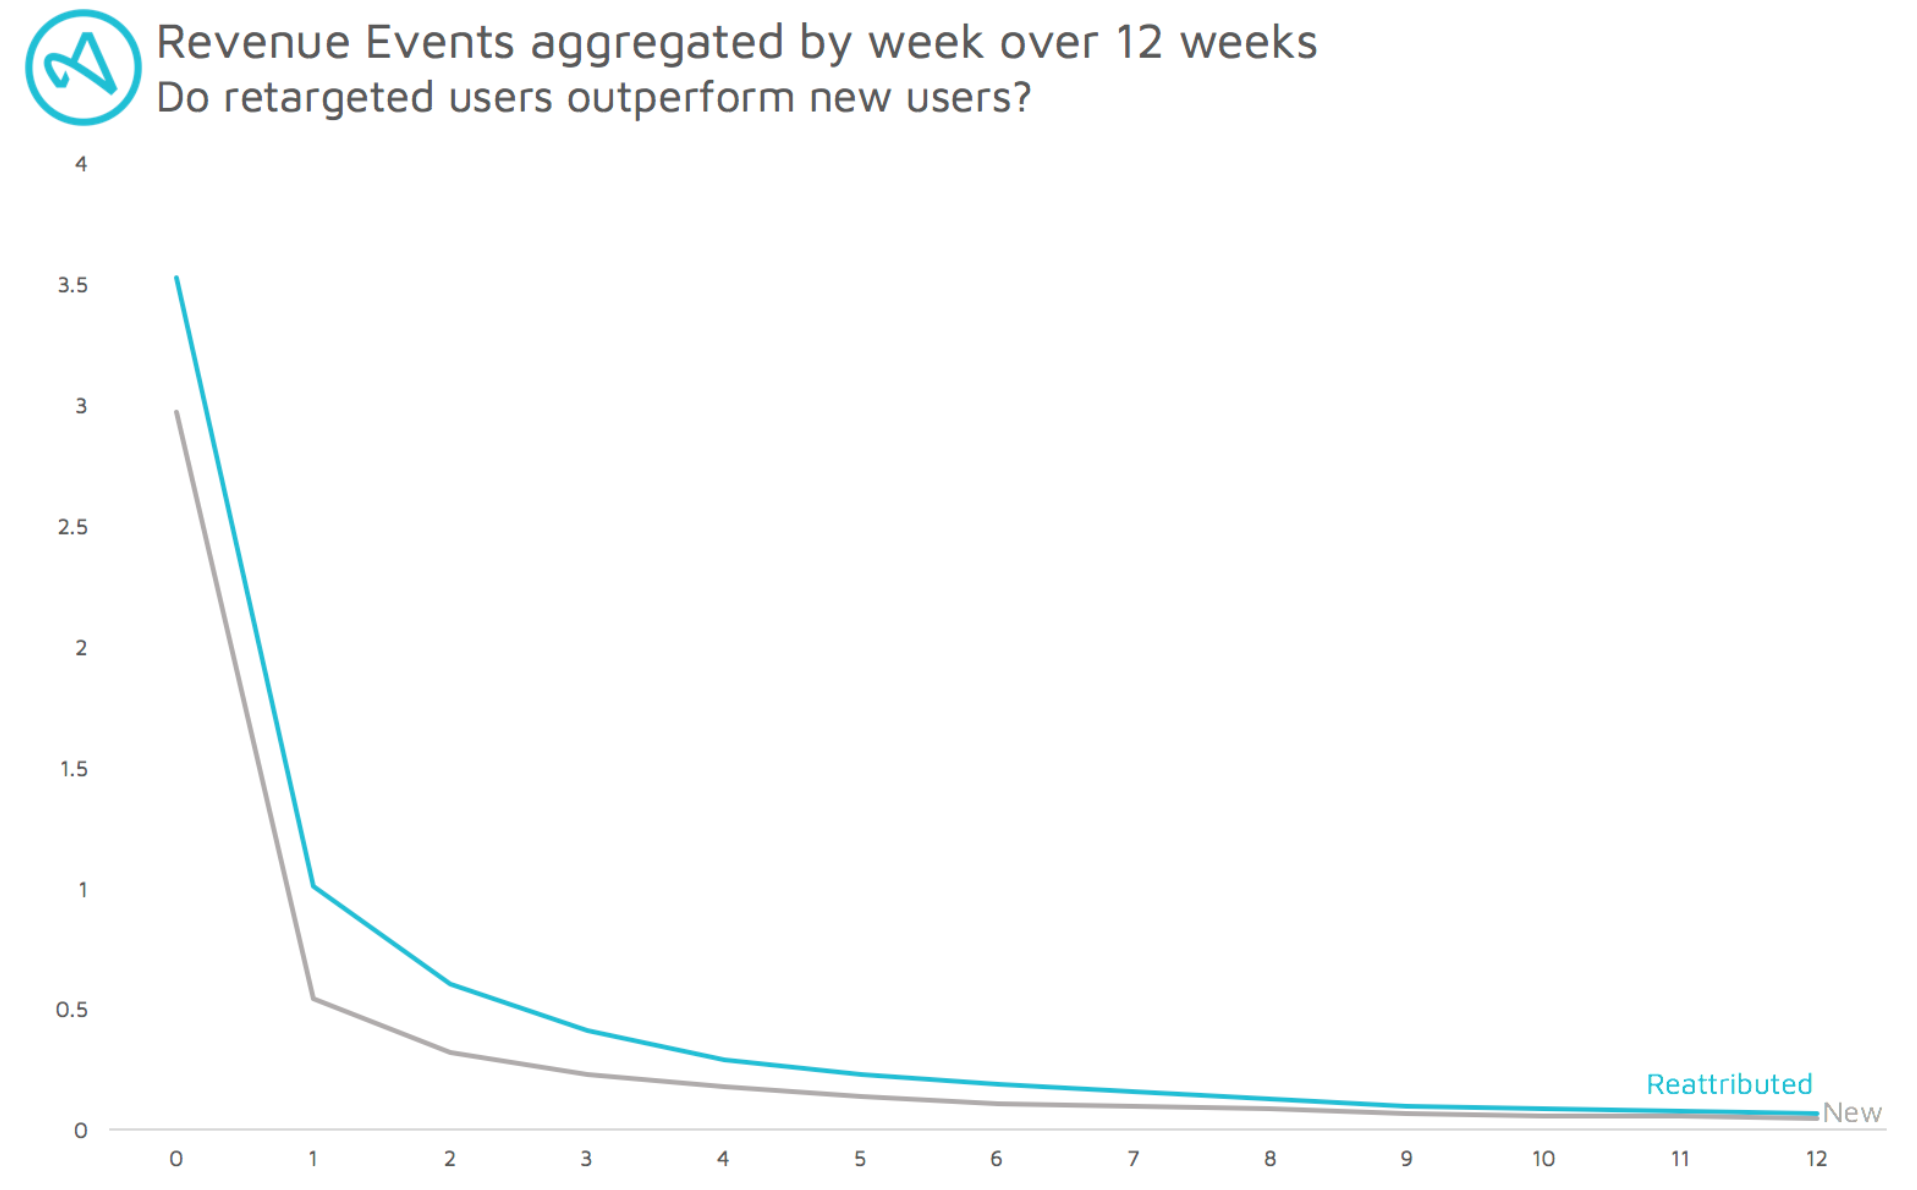 Revenue events aggregated by week over 12 weeks